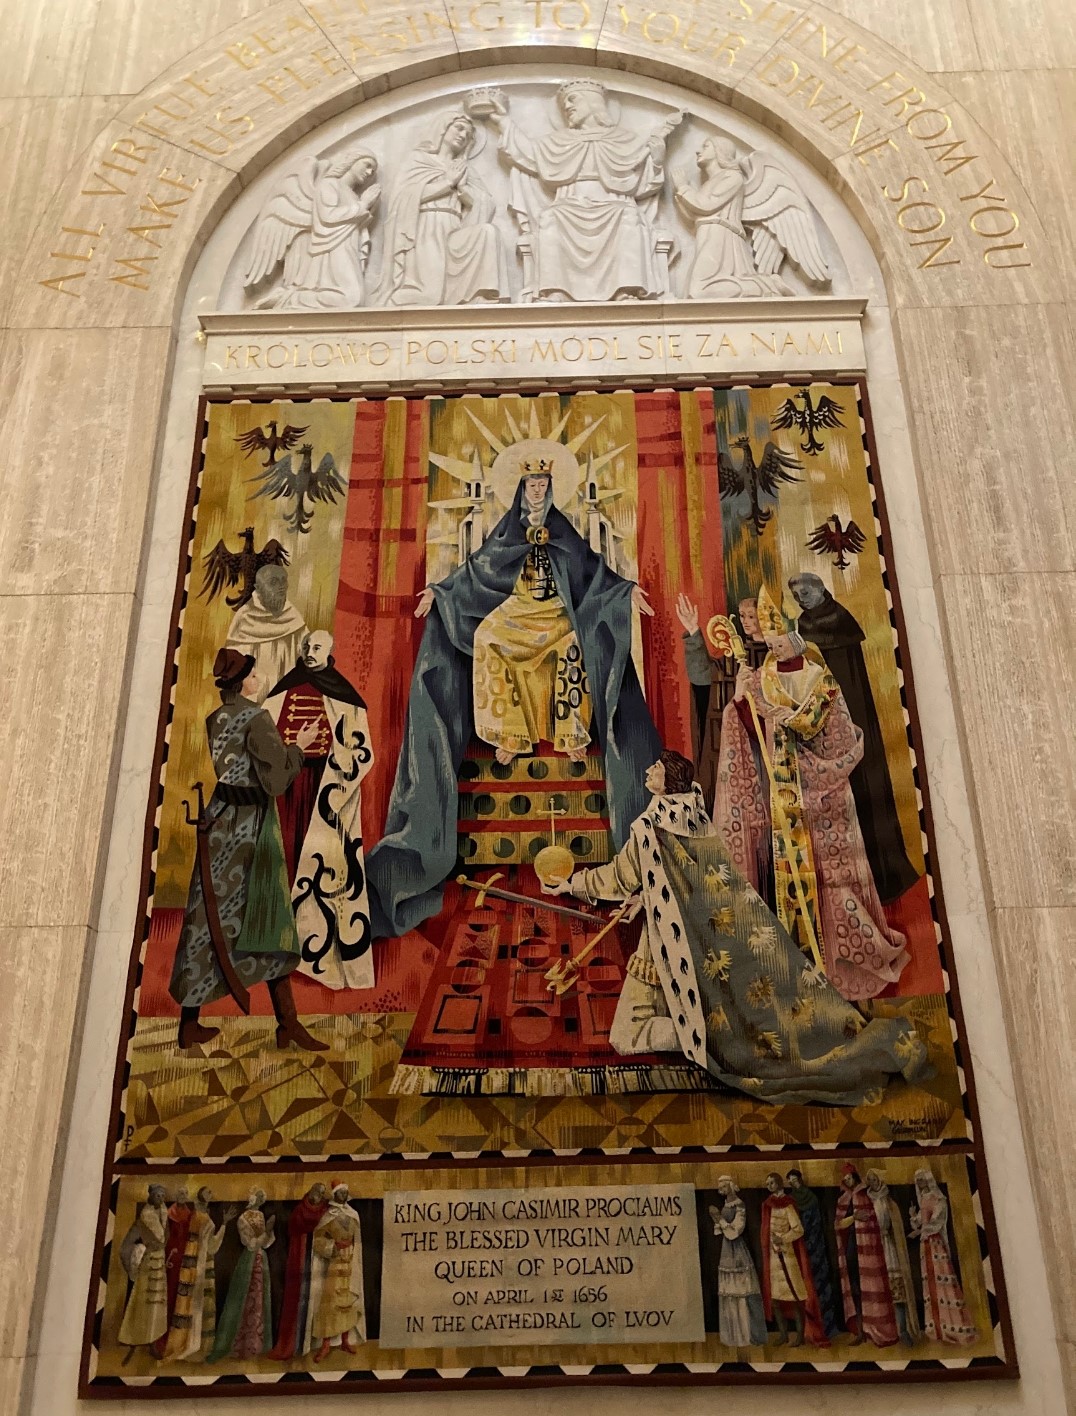 Fotografia przedstawiająca Paintings in the Polish Chapel at the Shrine of the Immaculate Conception in Washington, DC